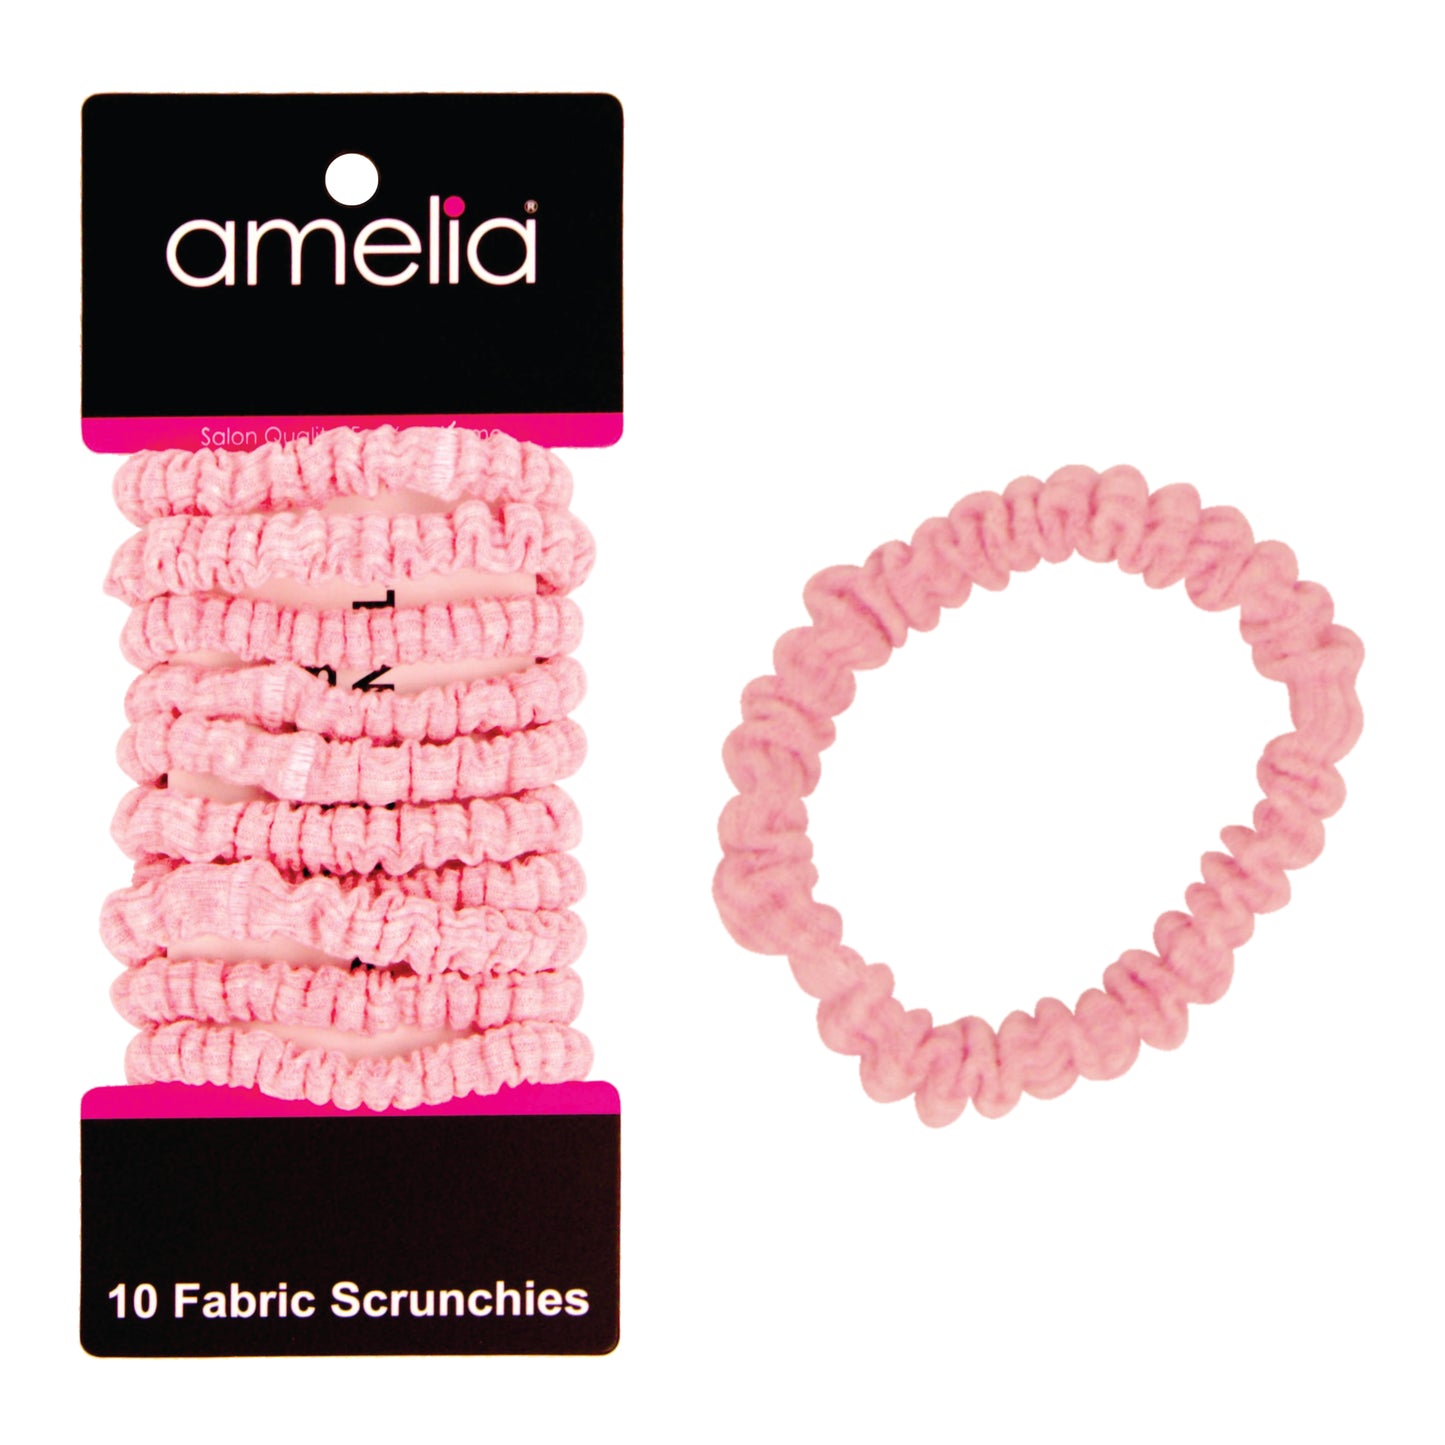 Amelia Beauty, Pastel Red Ribbed Scrunchies, 2.25in Diameter, Gentle on Hair, Strong Hold, No Snag, No Dents or Creases. 10 Pack